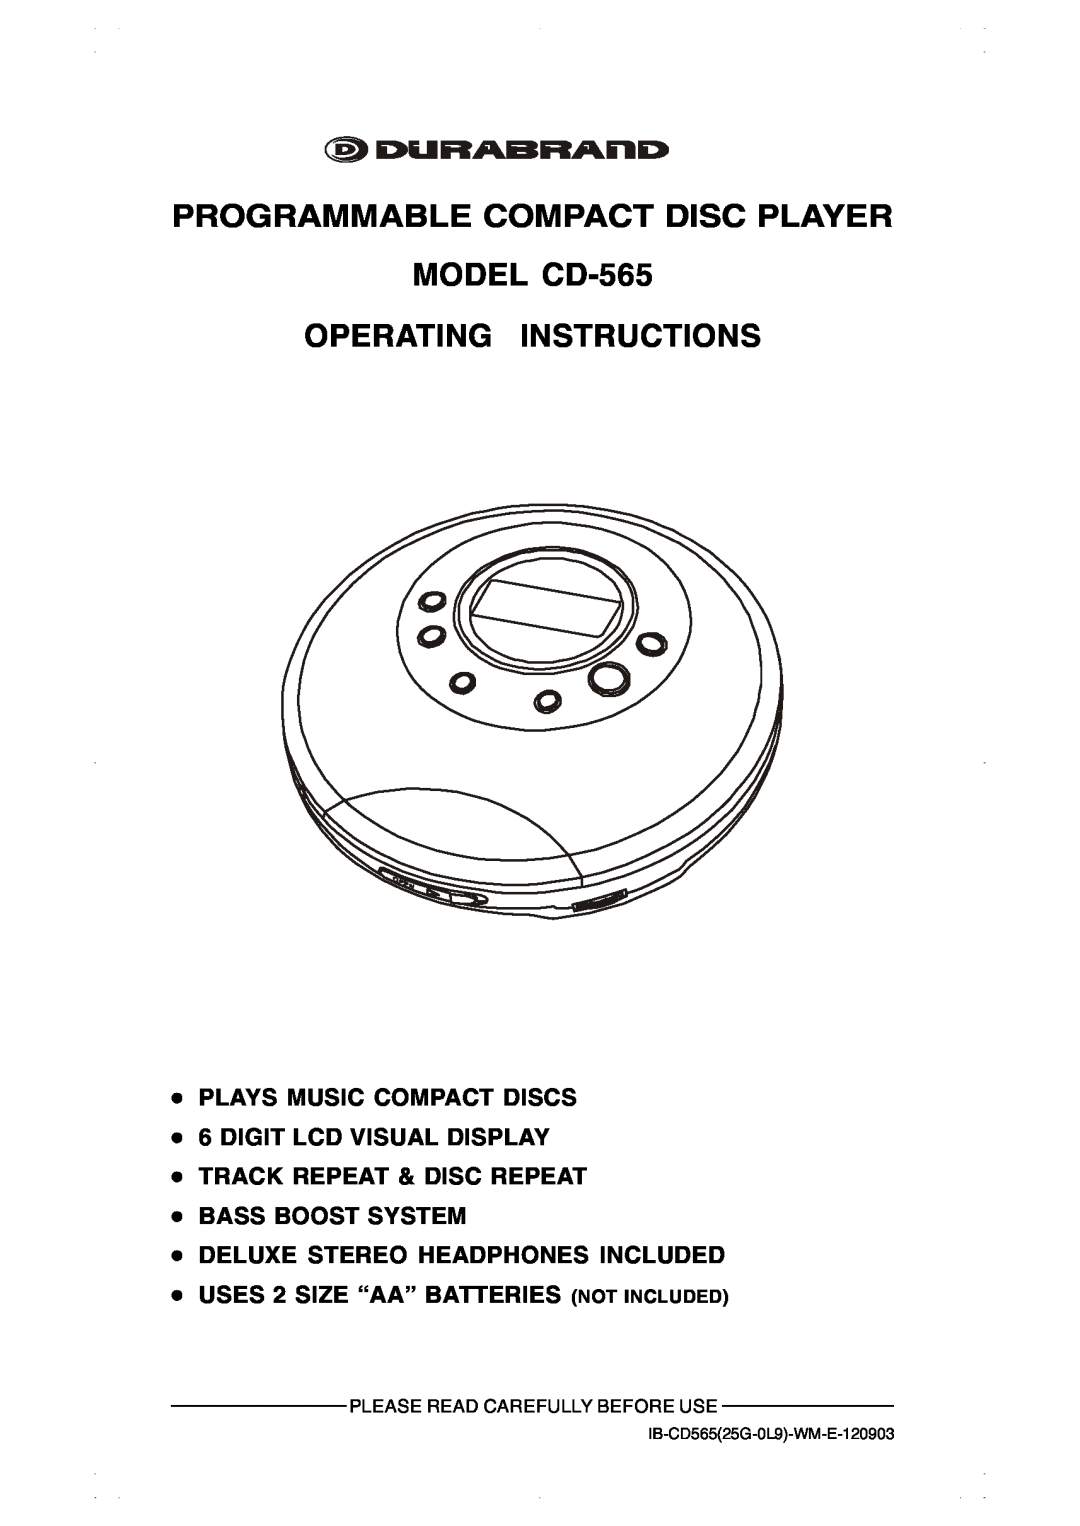 Lenoxx Electronics operating instructions PROGRAMMABLE COMPACT DISC PLAYER MODEL CD-565, Operating Instructions 